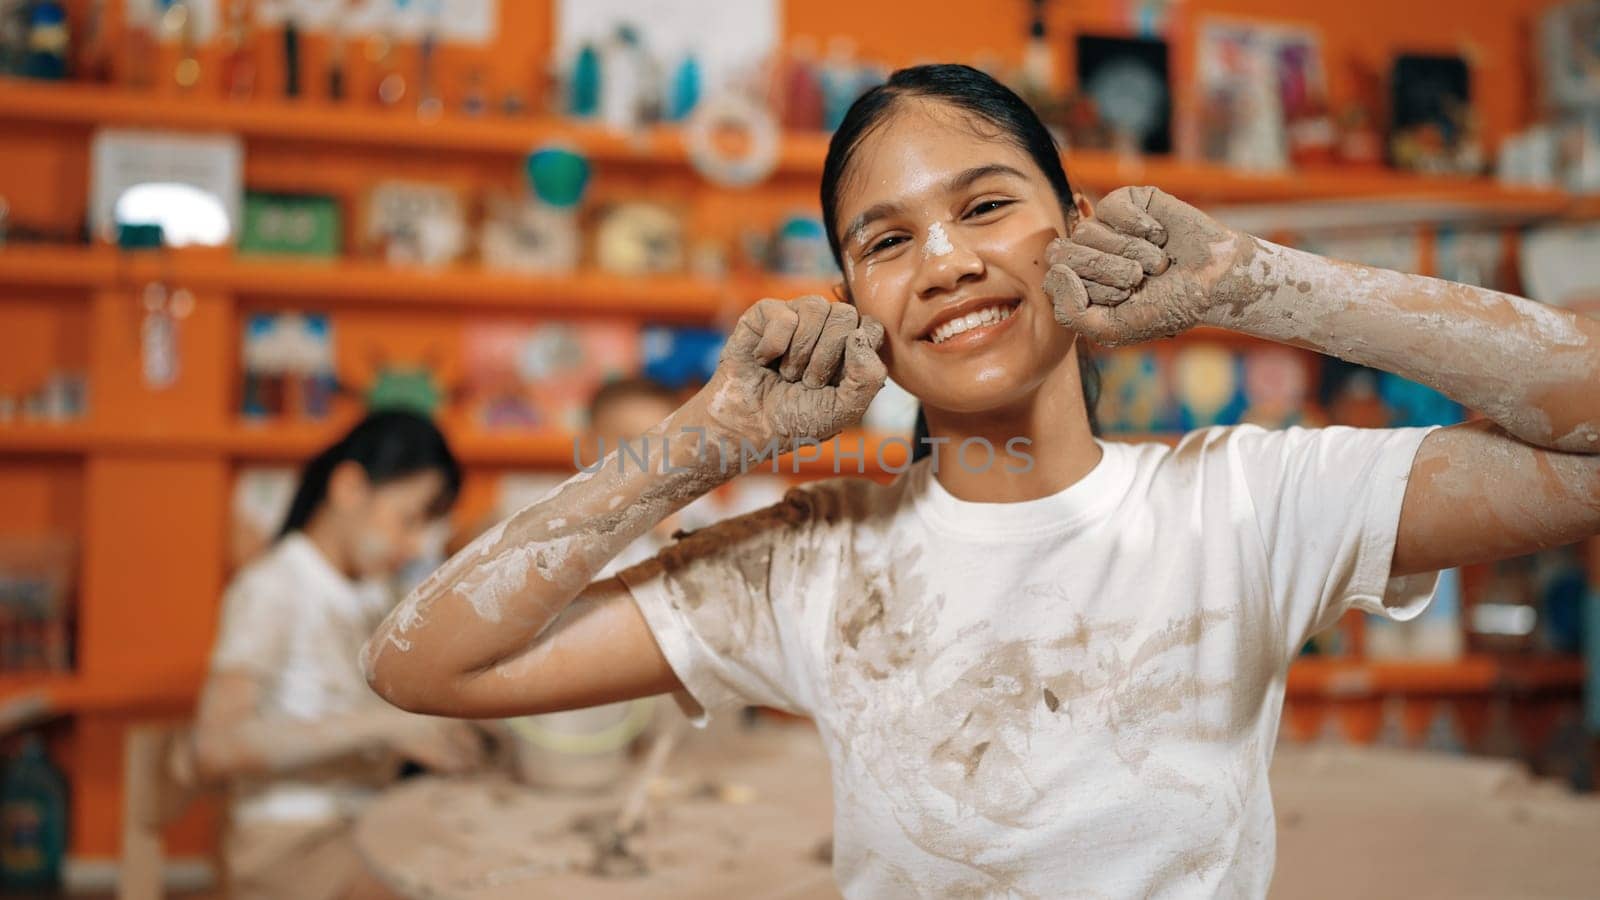 Happy caucasian girl pose at camera while diverse children modeling clay behind. Cute student wearing dirty shirt while looking at camera at workshop in art lesson. Blurring background. Edification.